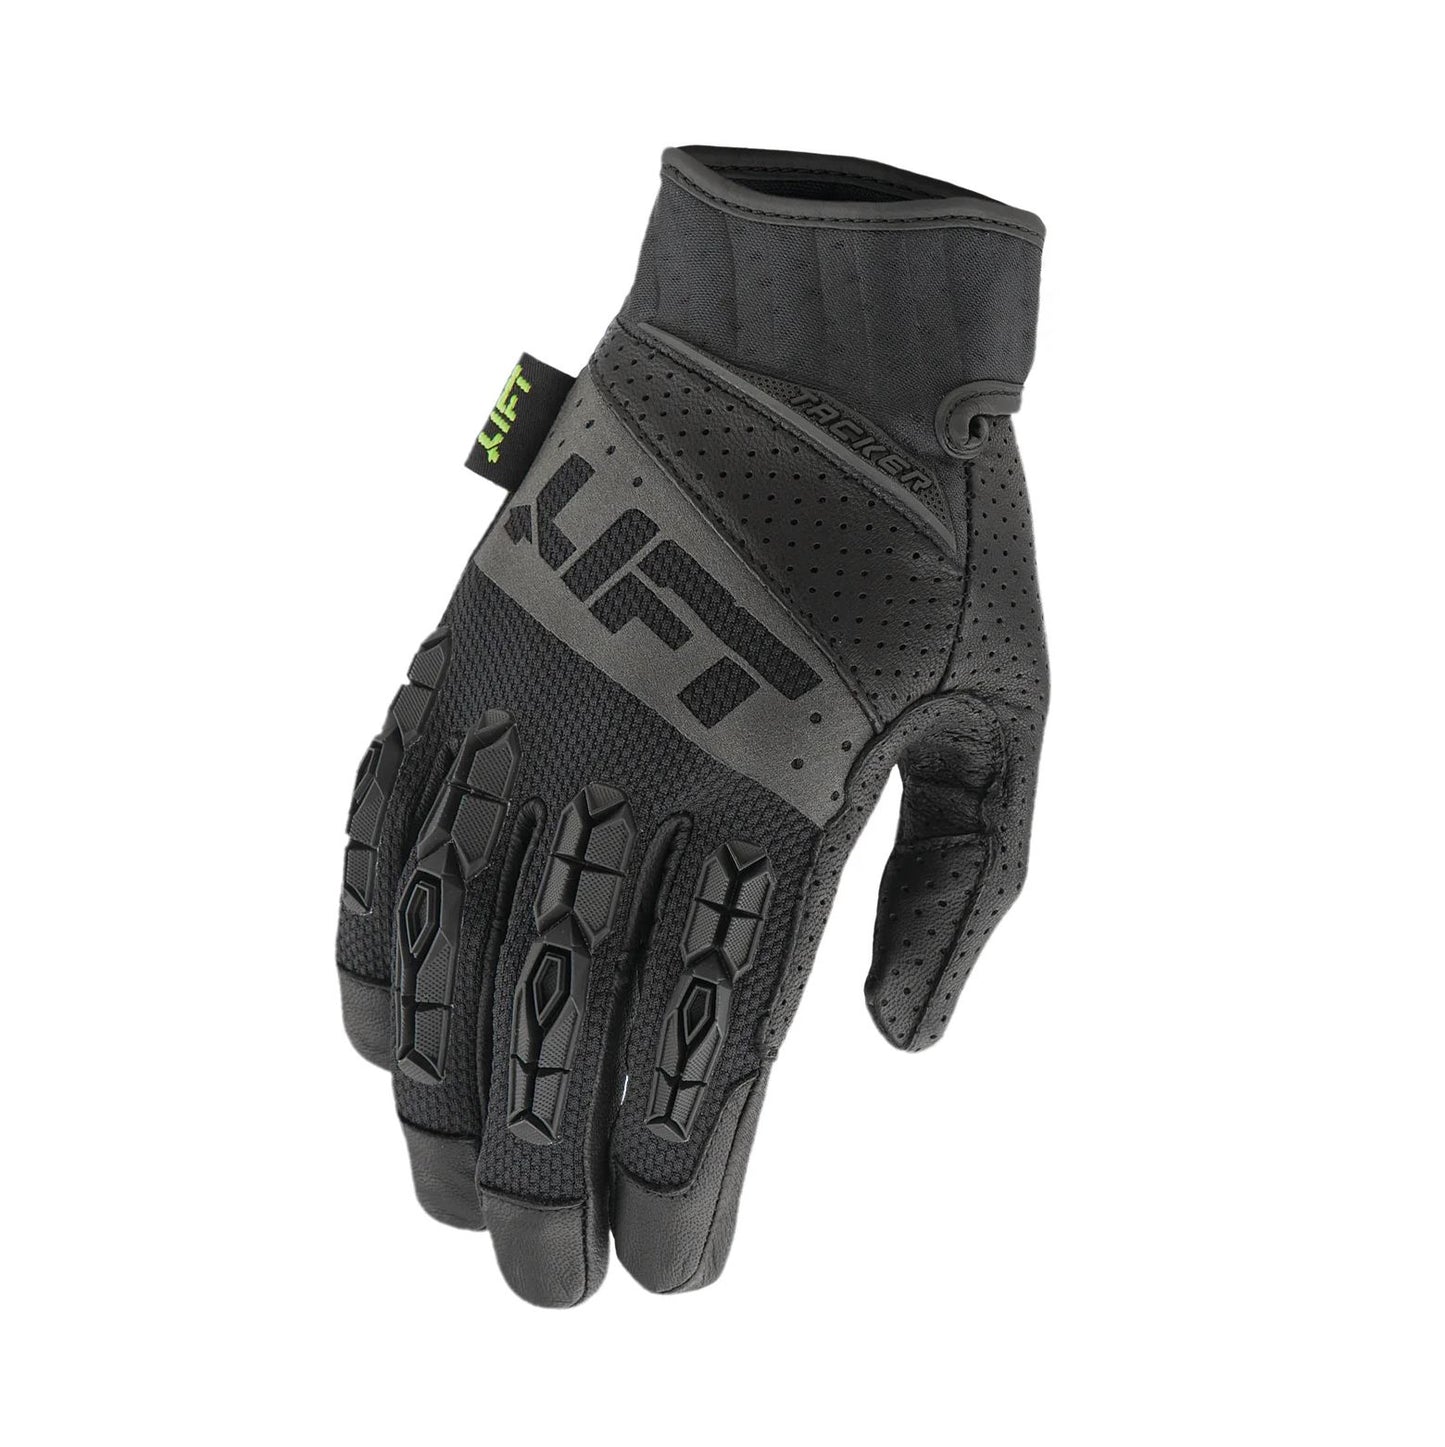 Tacker Black on Black Winter Glove with Thinsulate Lining